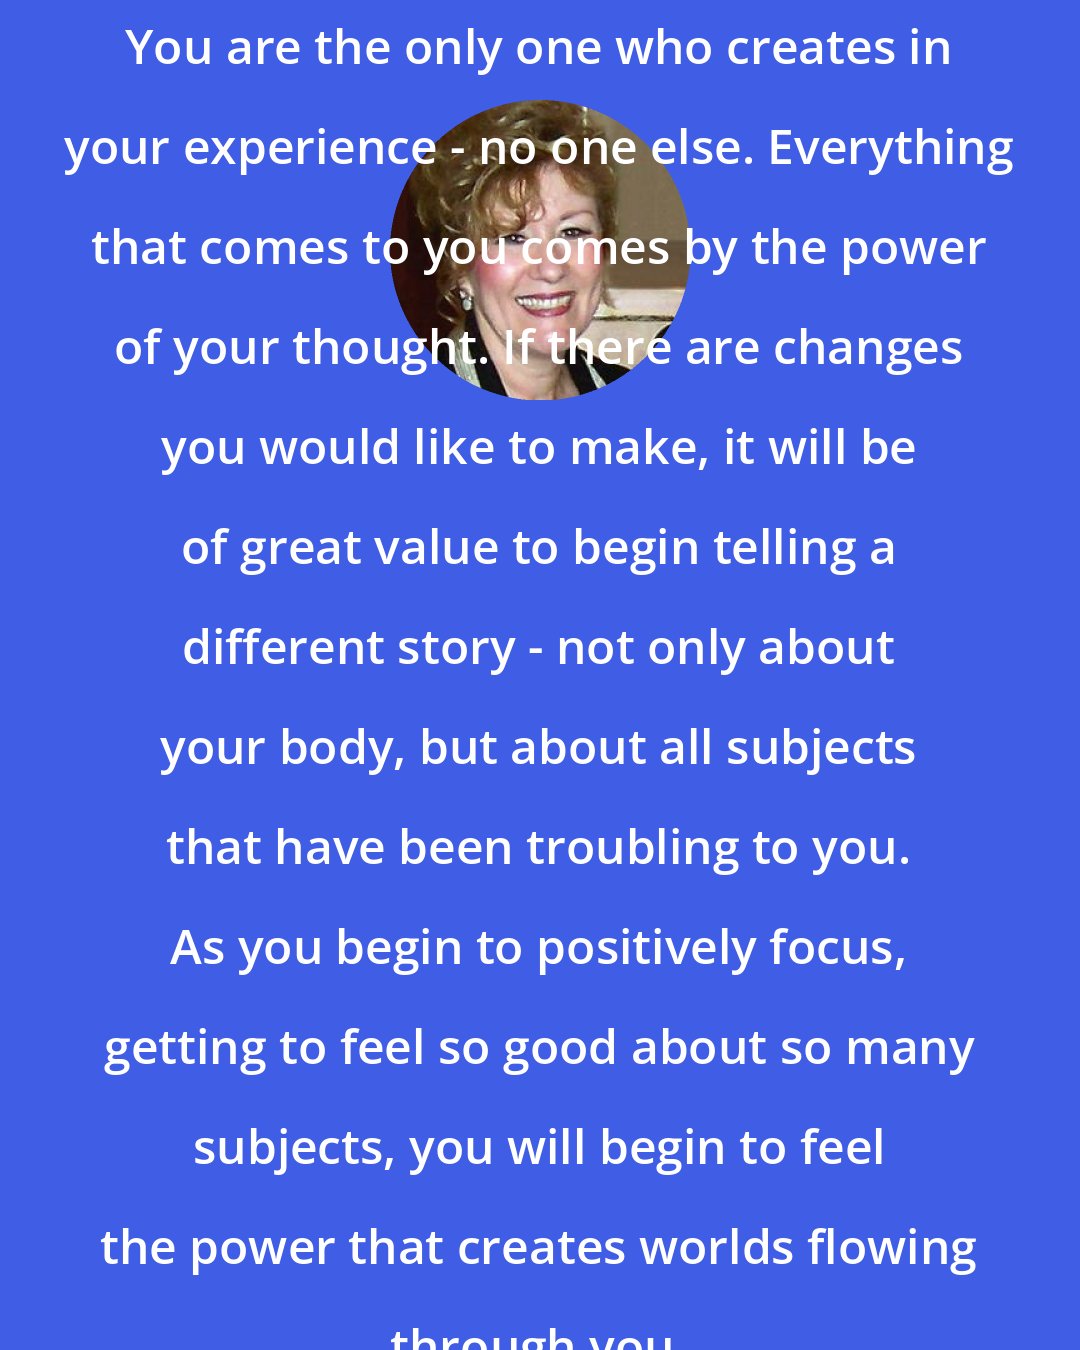 Esther Hicks: You are the only one who creates in your experience - no one else. Everything that comes to you comes by the power of your thought. If there are changes you would like to make, it will be of great value to begin telling a different story - not only about your body, but about all subjects that have been troubling to you. As you begin to positively focus, getting to feel so good about so many subjects, you will begin to feel the power that creates worlds flowing through you.